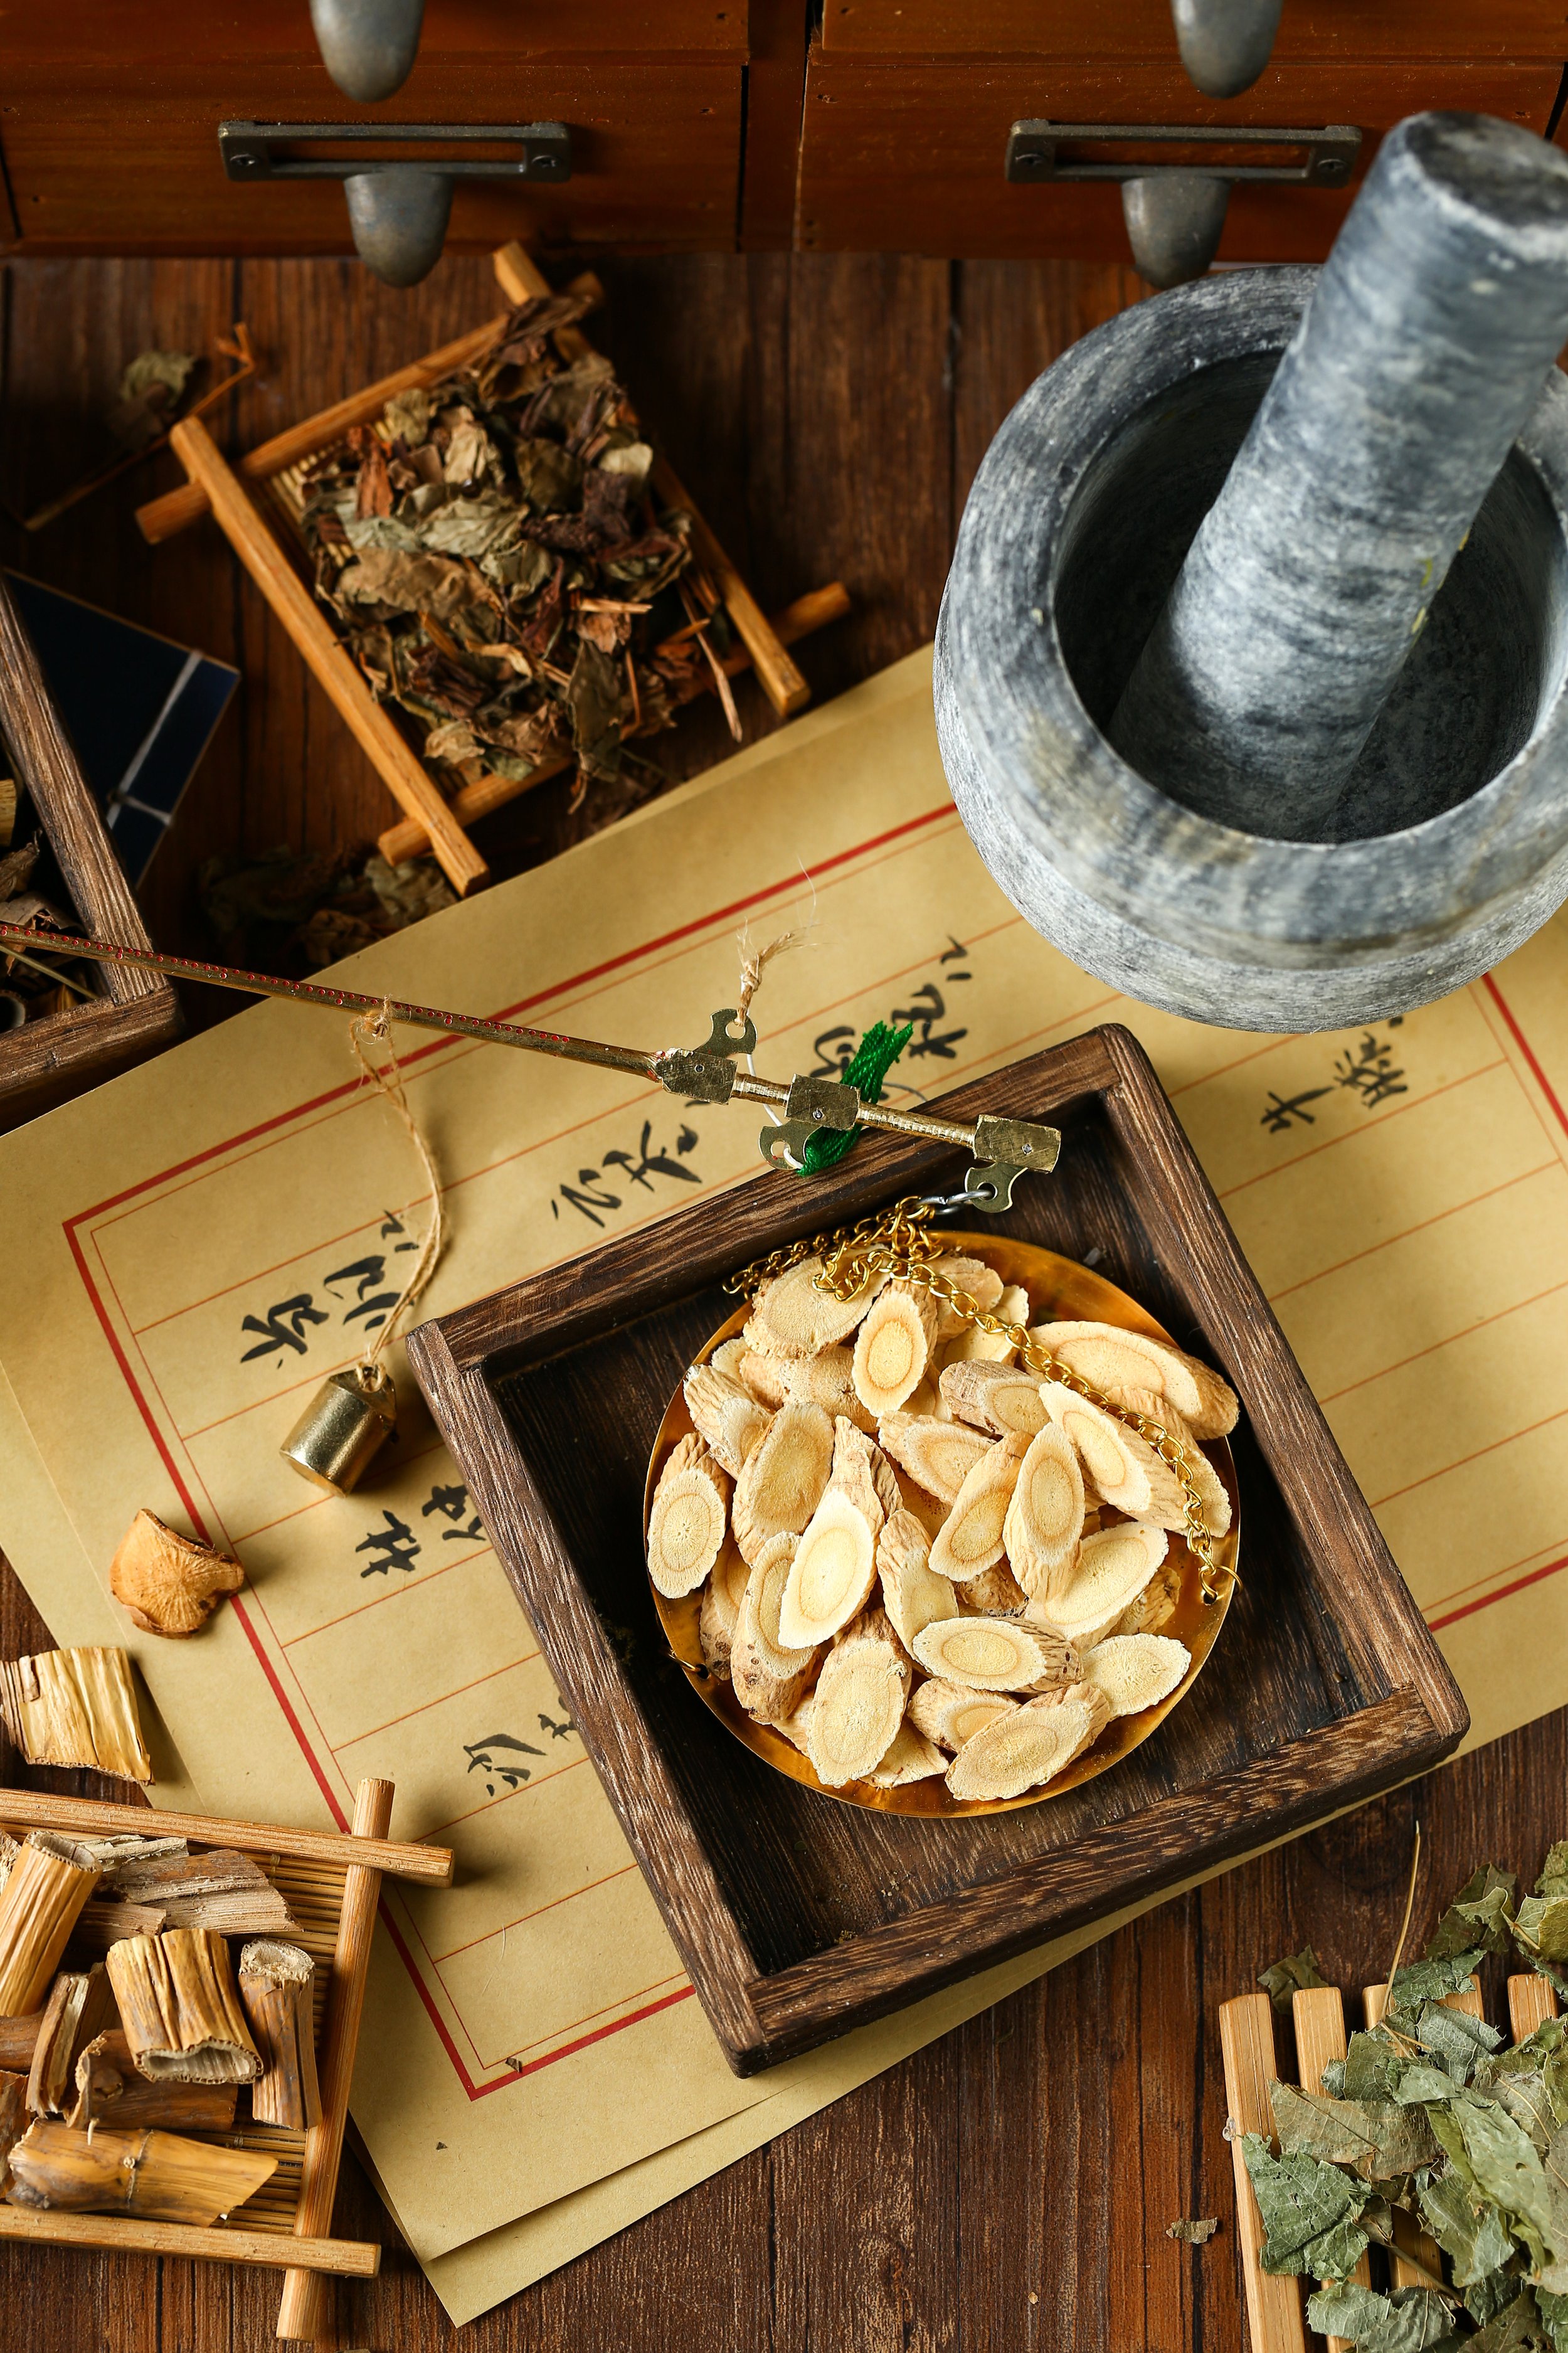 chinese-traditional-herbal-medicine-steelyard-translation-reads-as-chinese-herbal-therapy.jpg